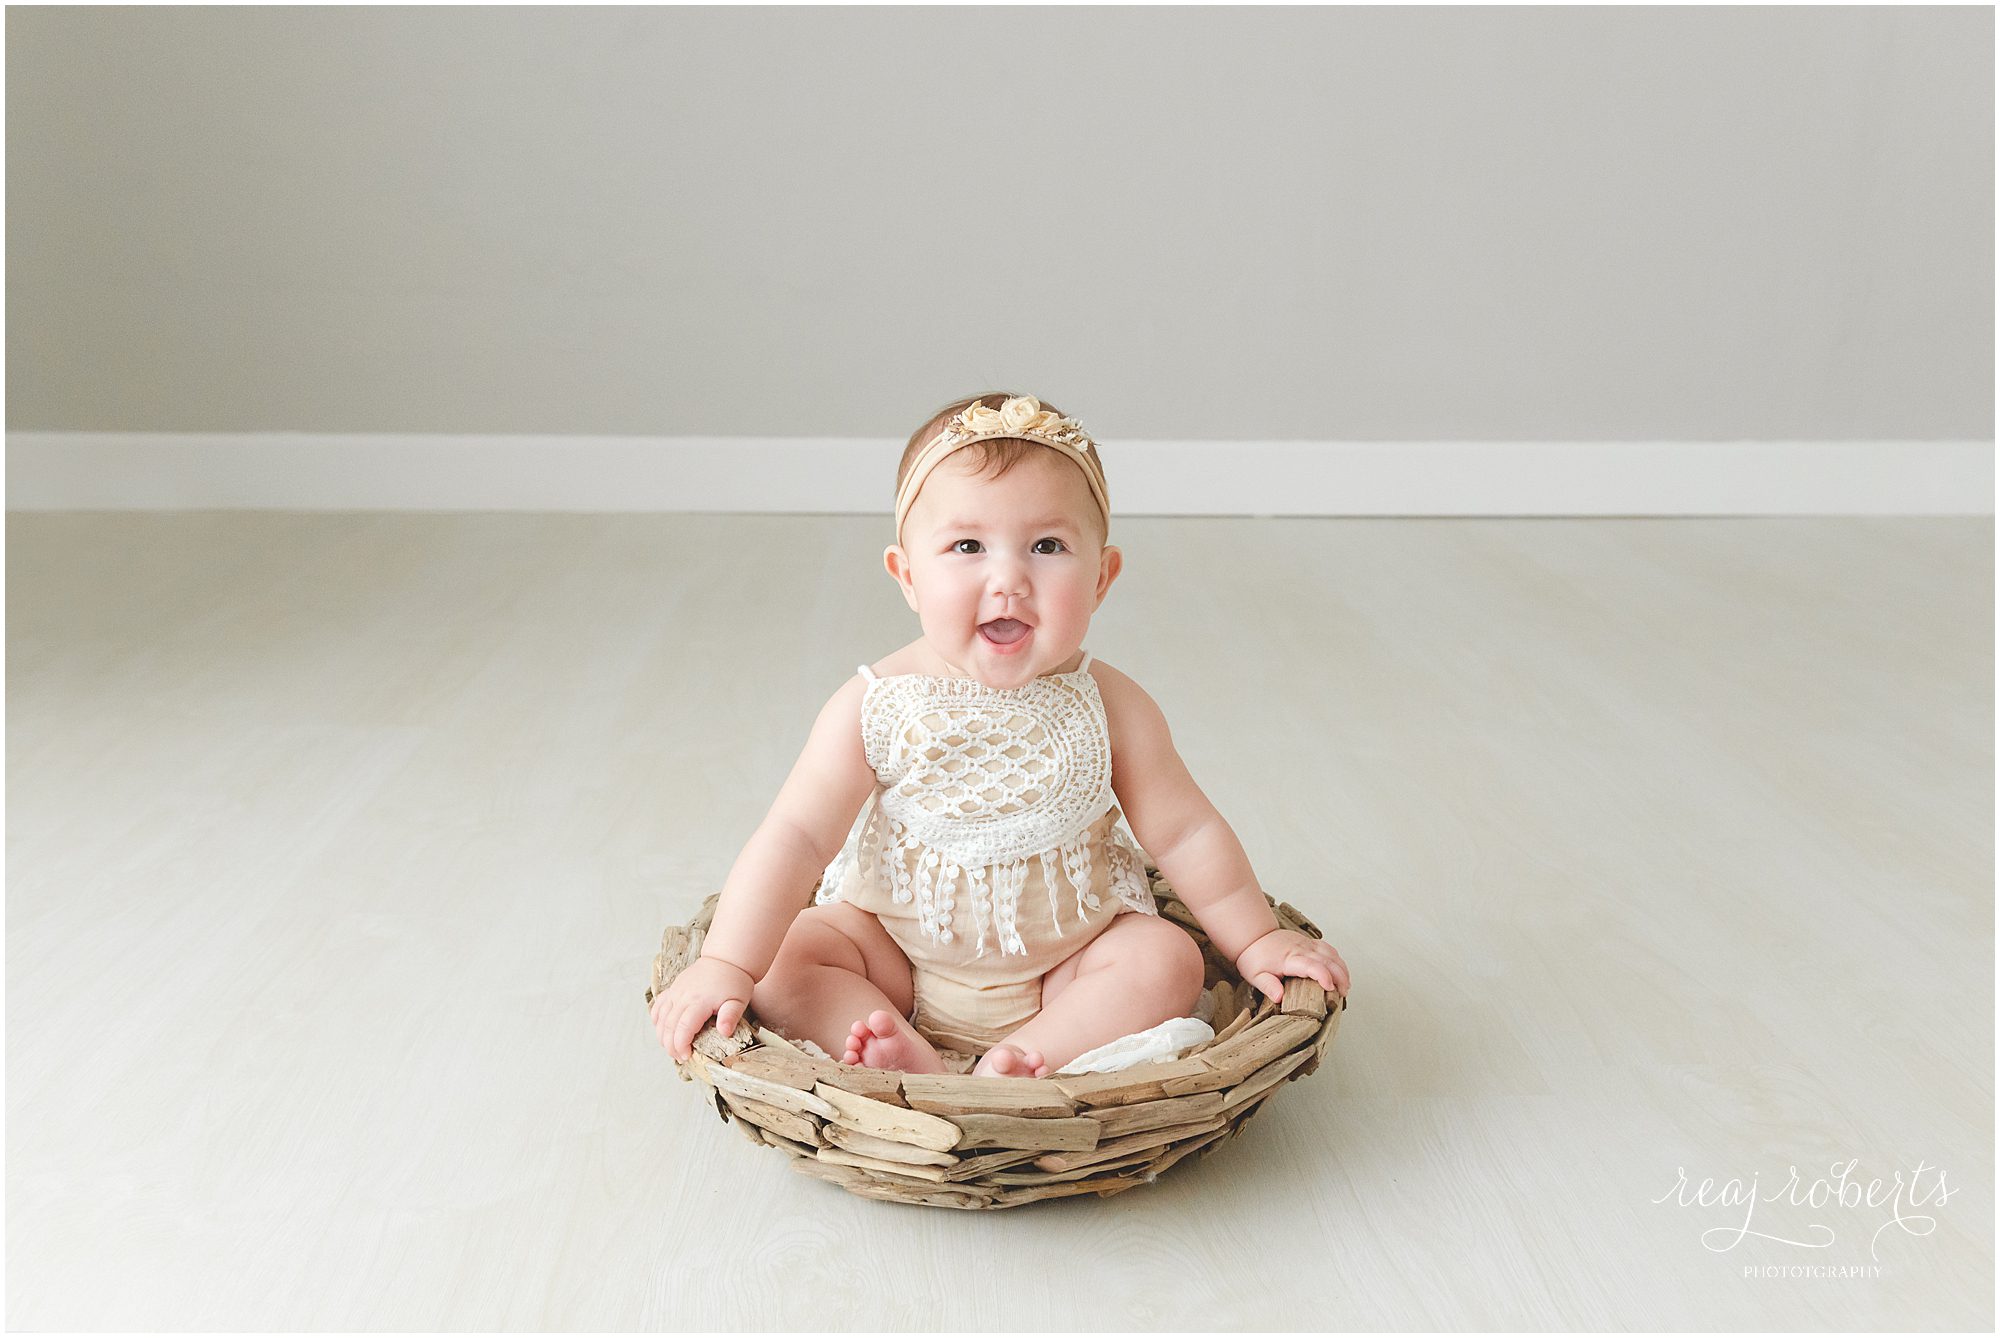 © Reaj Roberts Photography Chandler baby photographer, 6 month sitter milestone photos baby girl in driftwood basket